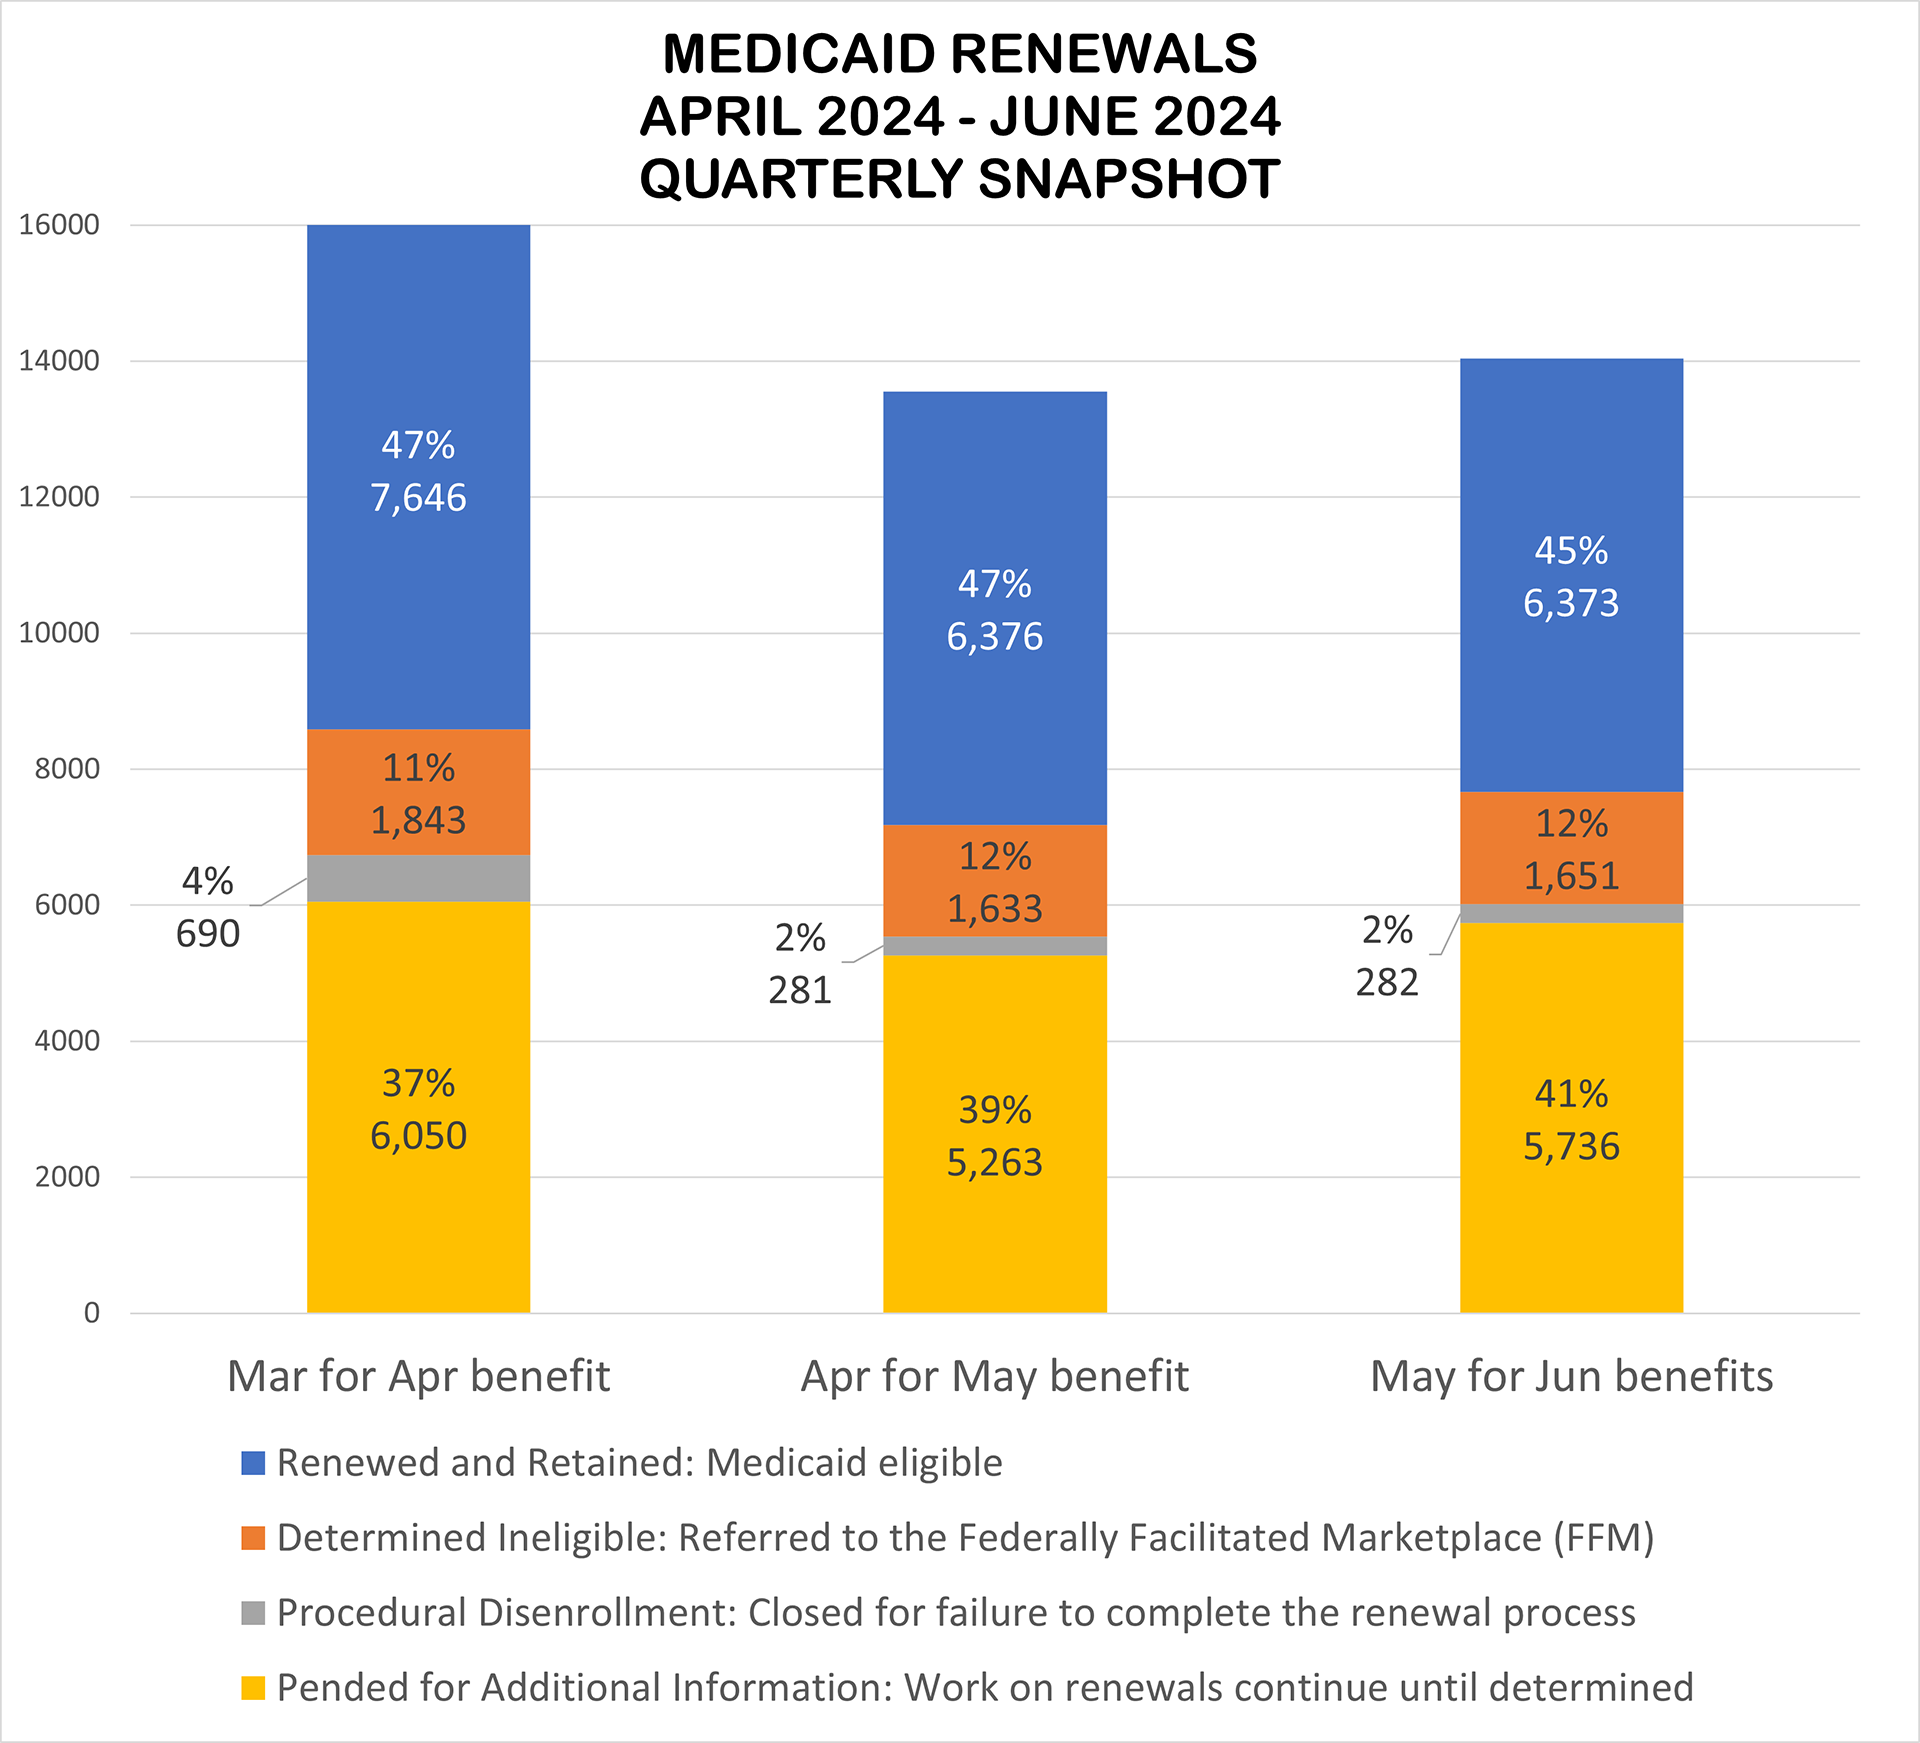 Medicaid Renewals Quarterly Snapshot. Click for full size. Data replicated in archive section at the bottom of this page.